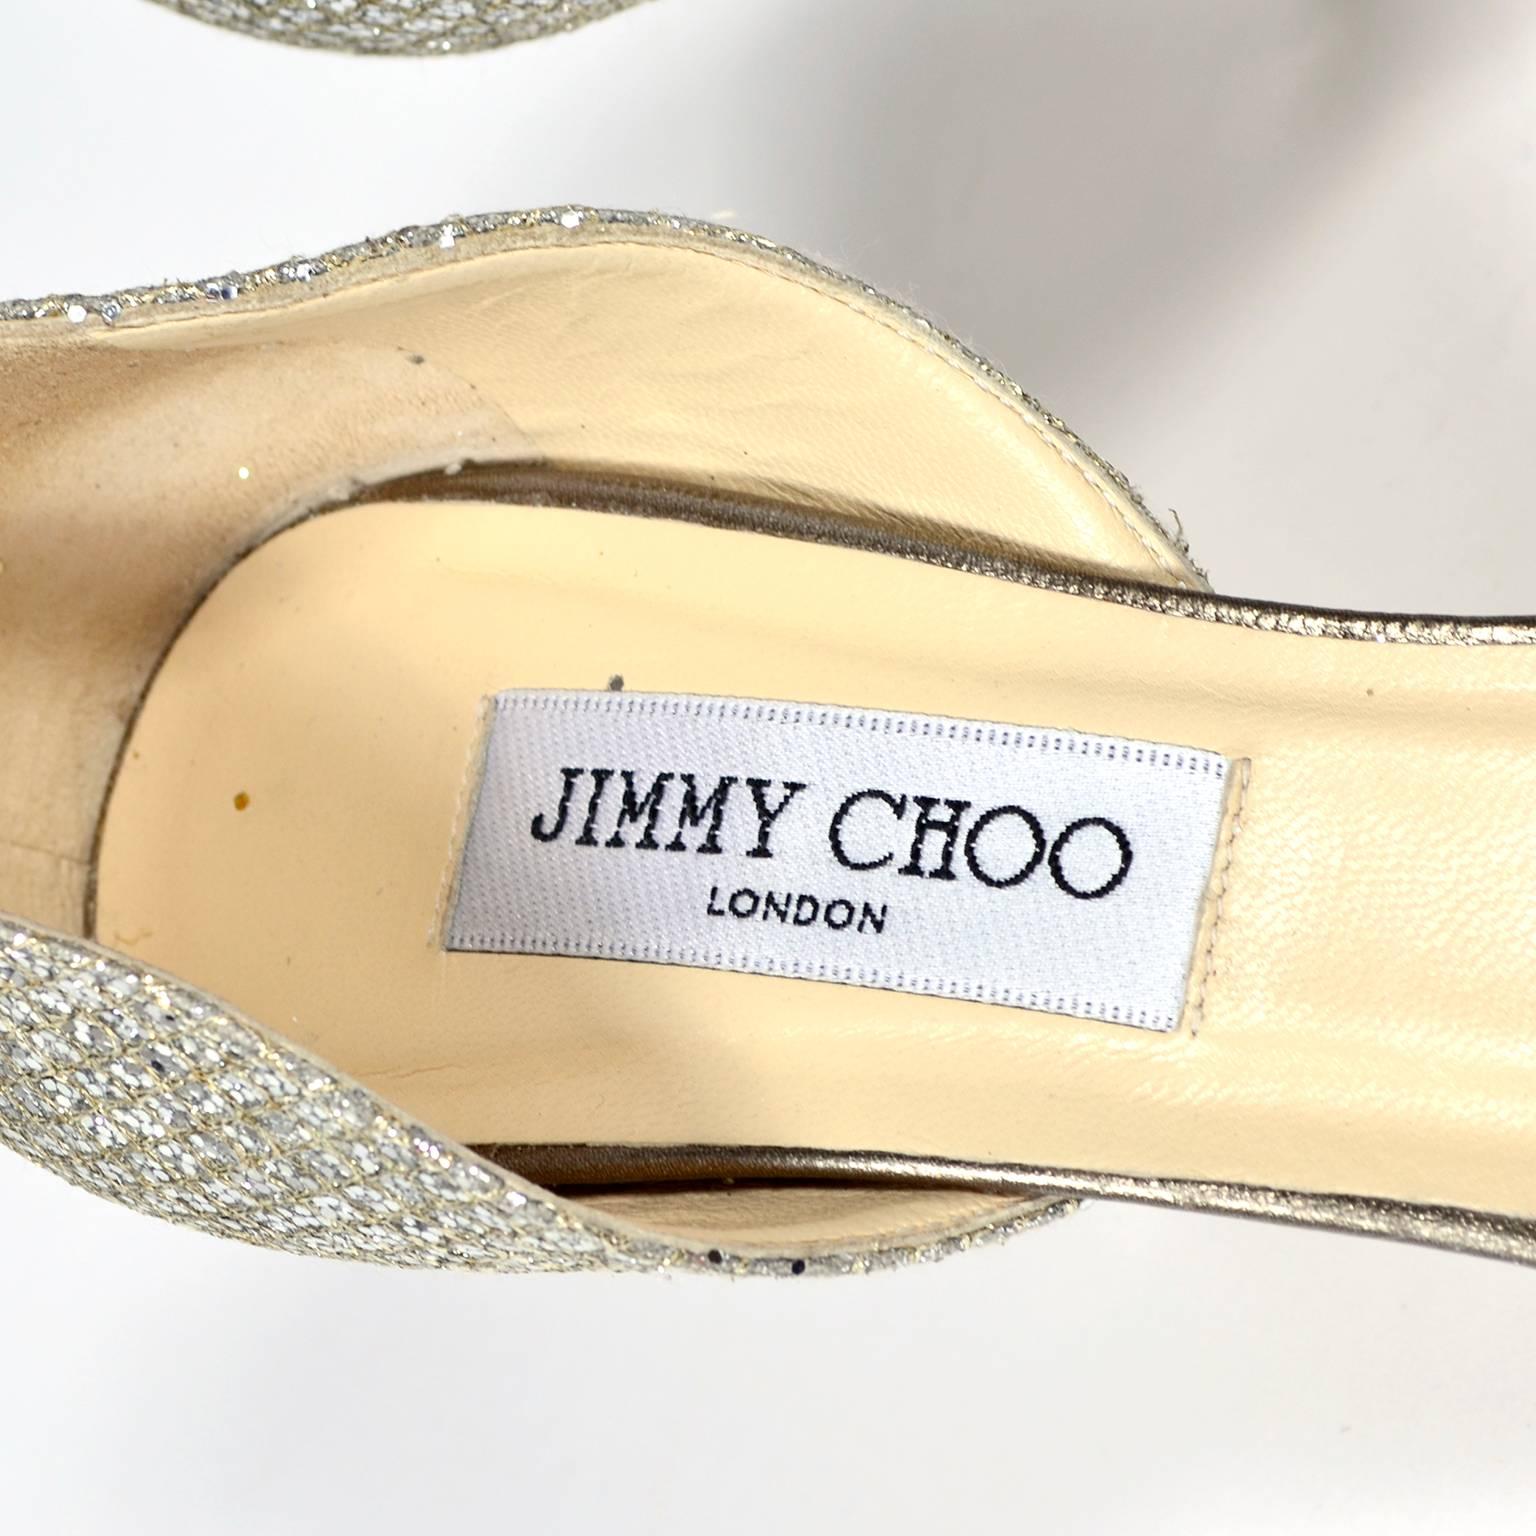 Jimmy Choo Shoes D'Orsay Pumps in Glitter Champagne Size 37.5 W/ Box & Bag For Sale 1